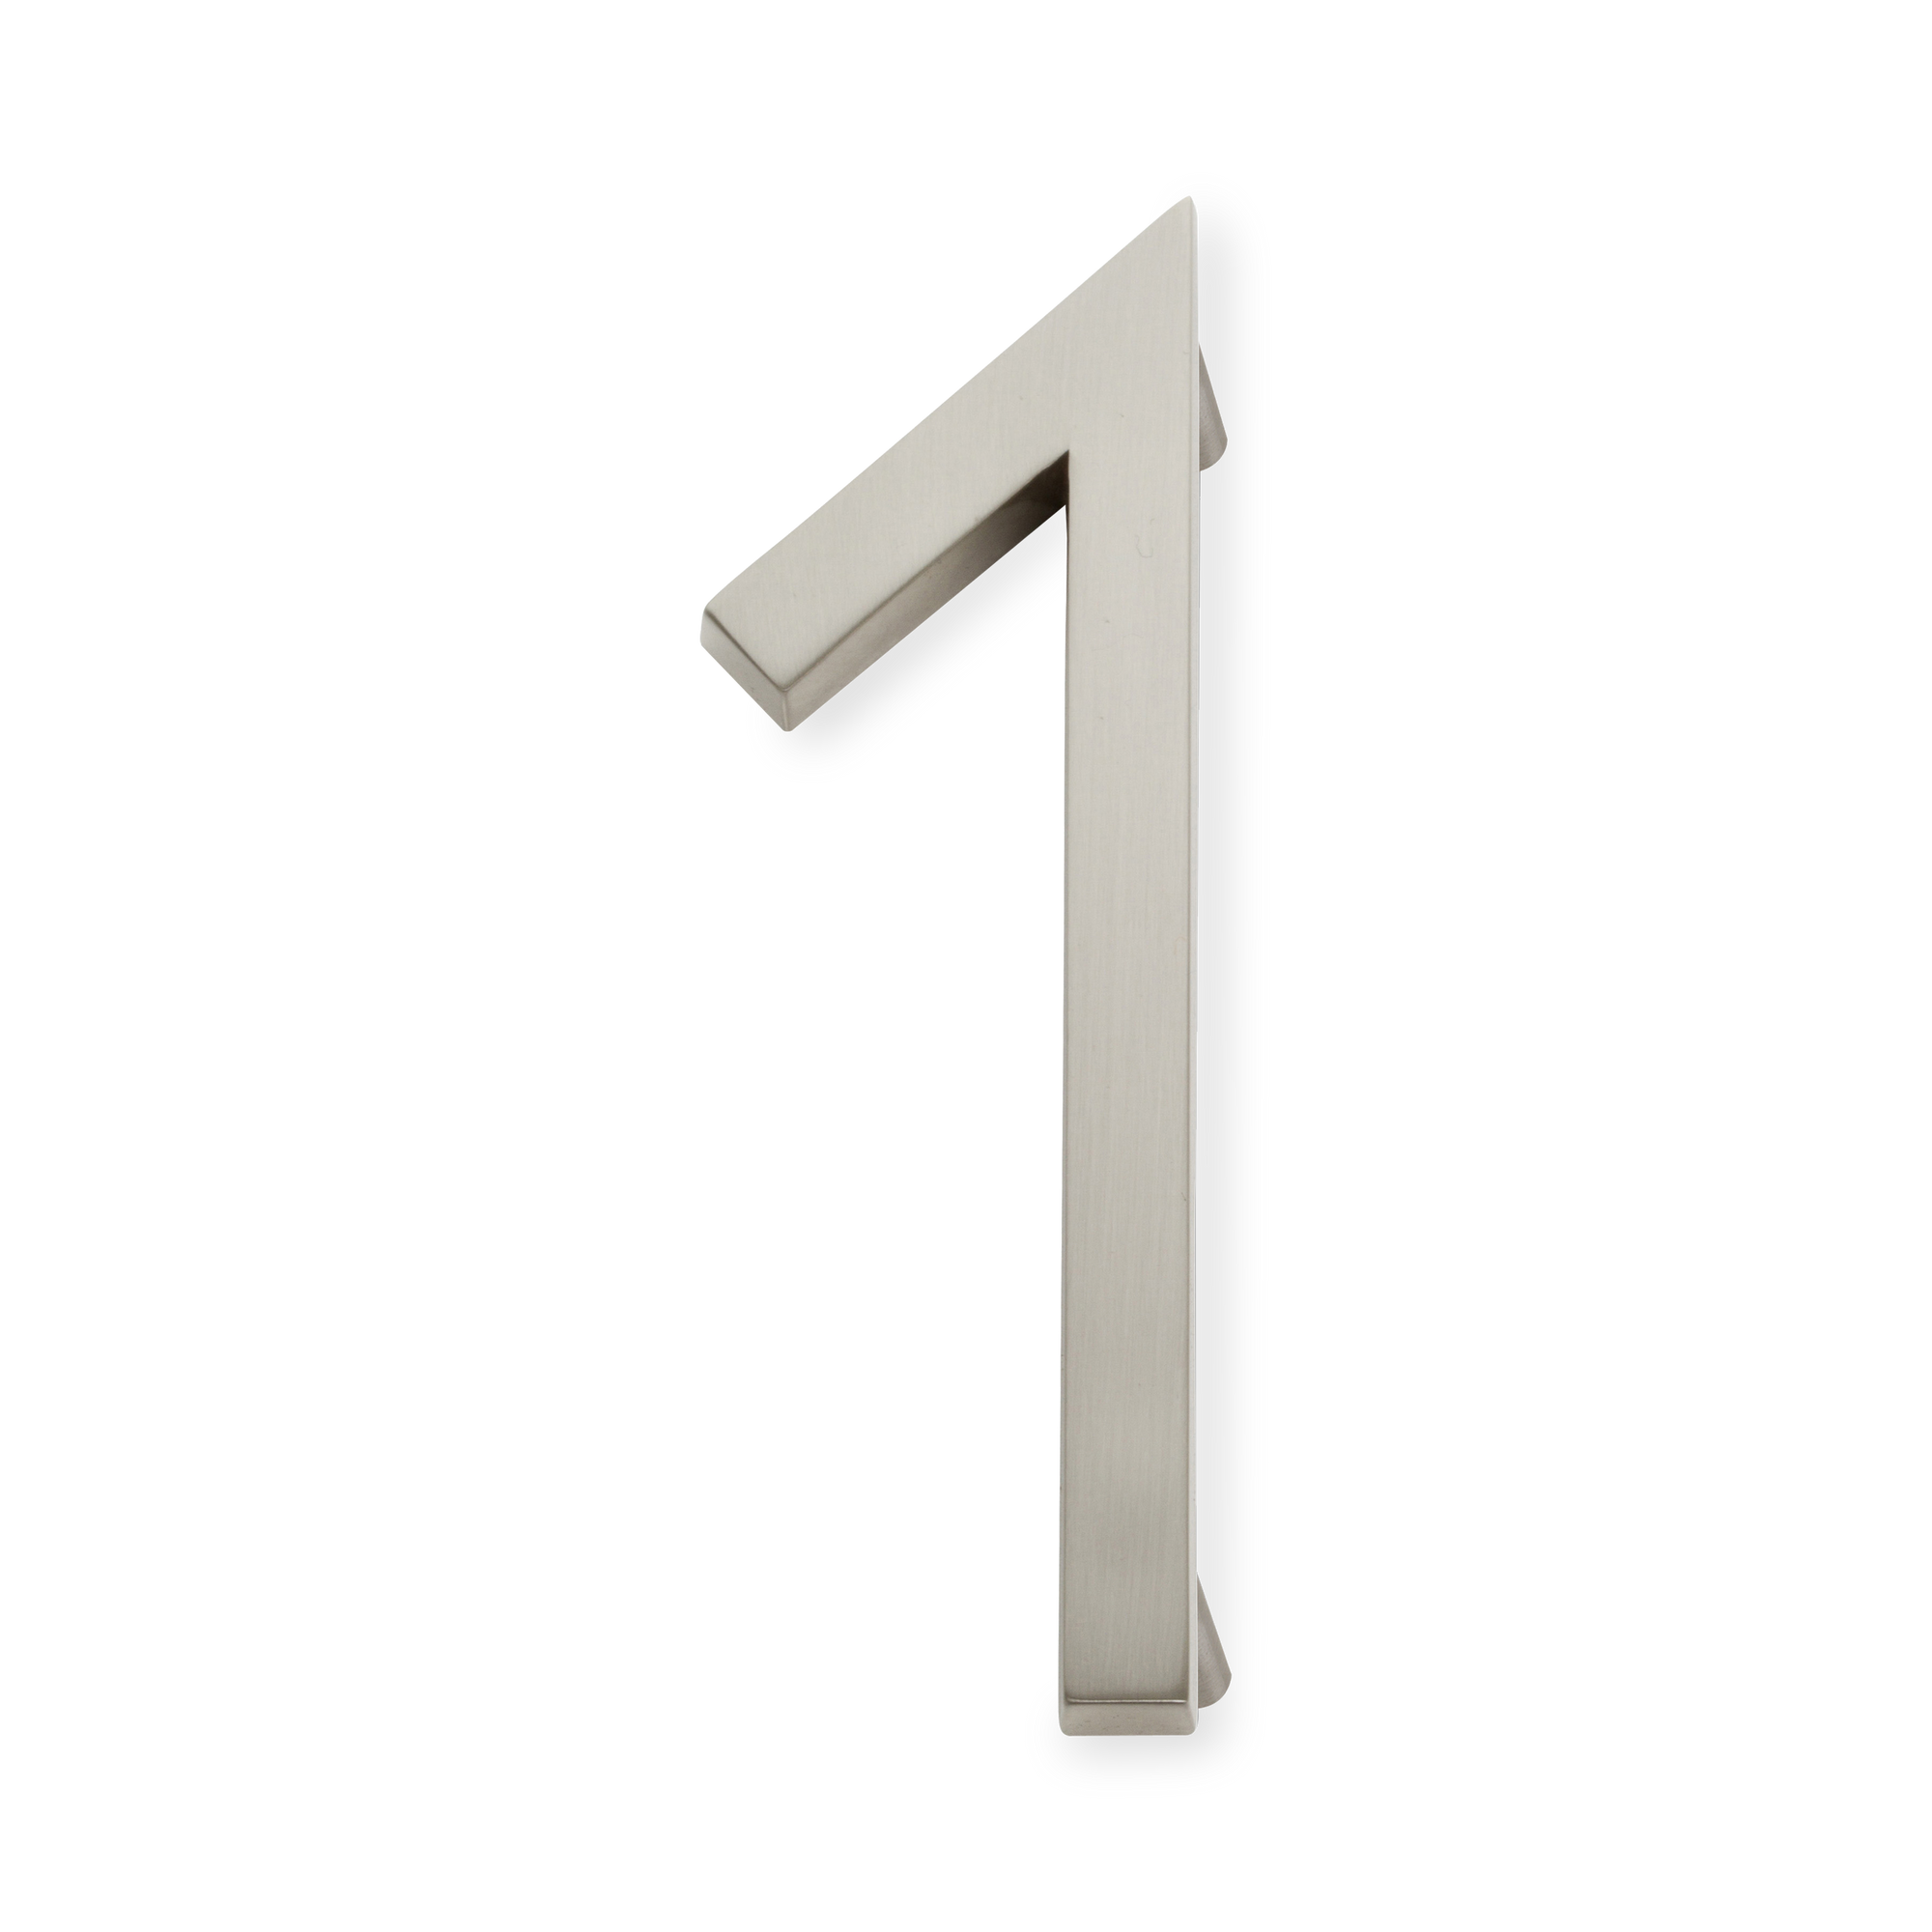 A seamless brushed nickel house number written in a narrow and modern font.